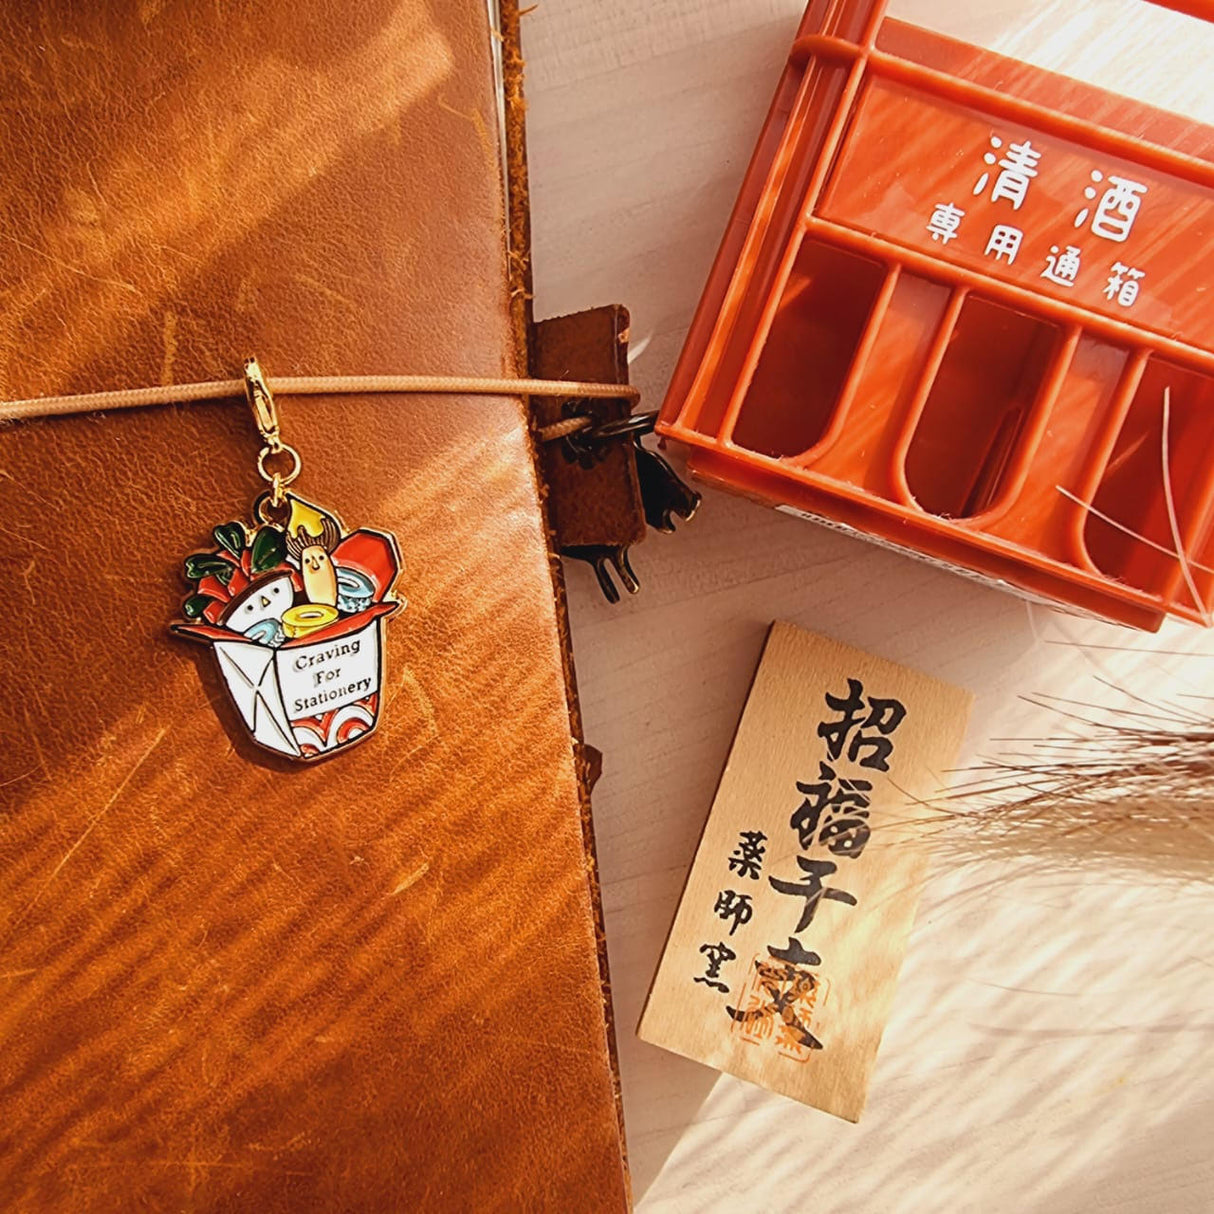 Elsie With Love "Craving for Stationery" Charm